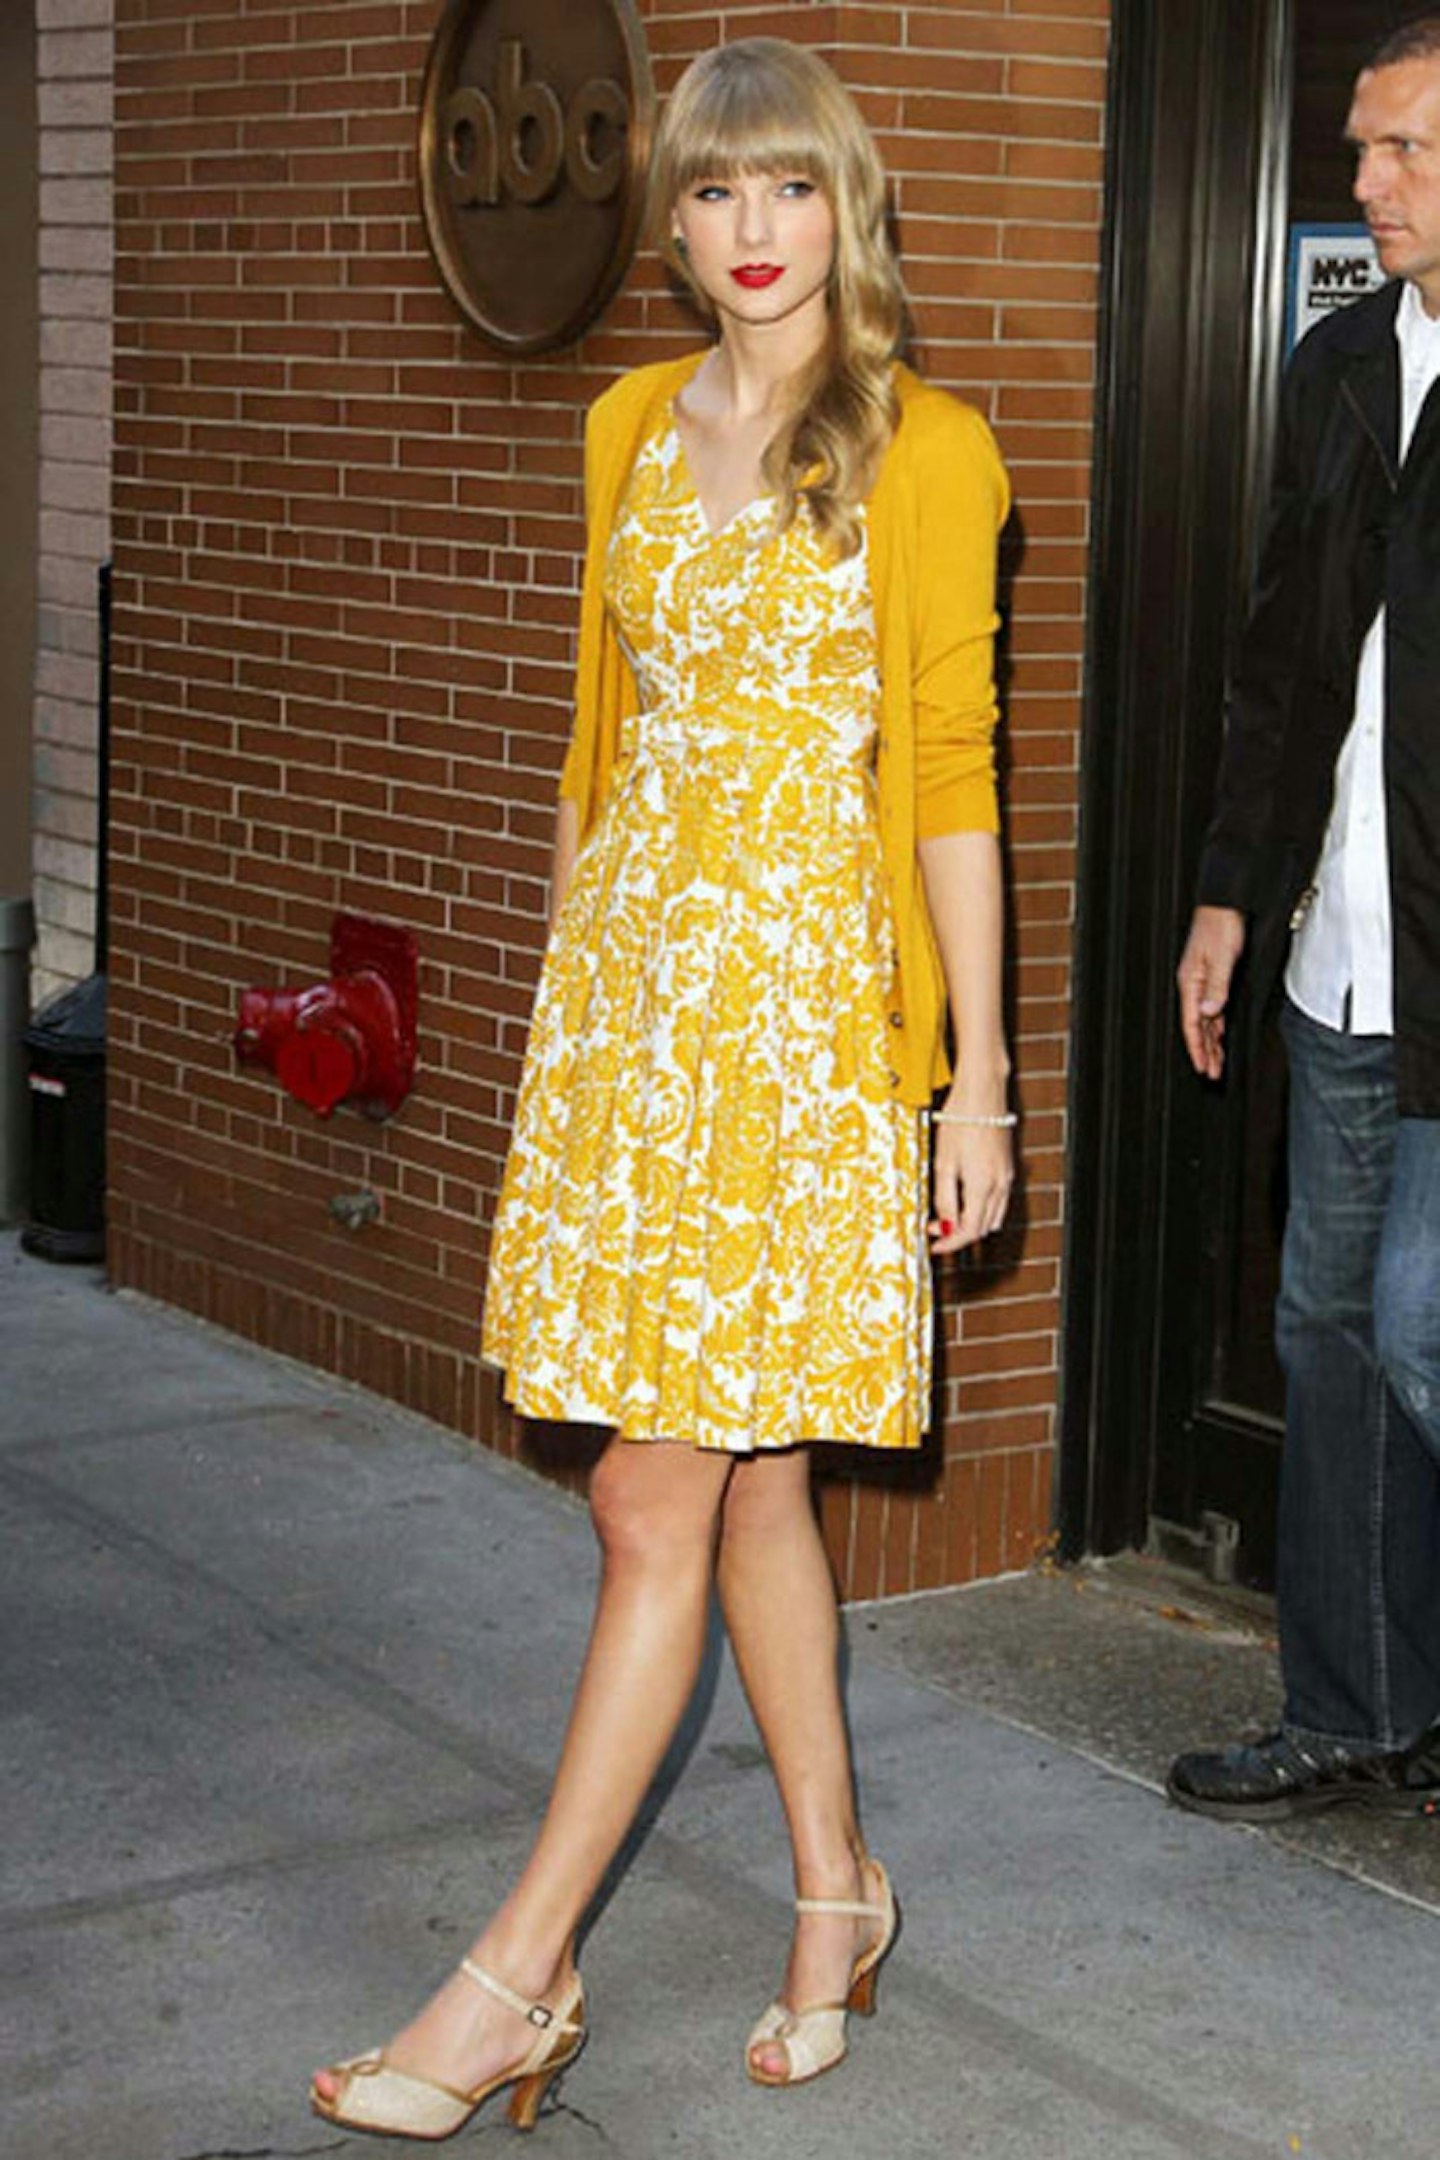 Taylor Swift at the ABC Studios in New York, 22 October 2012